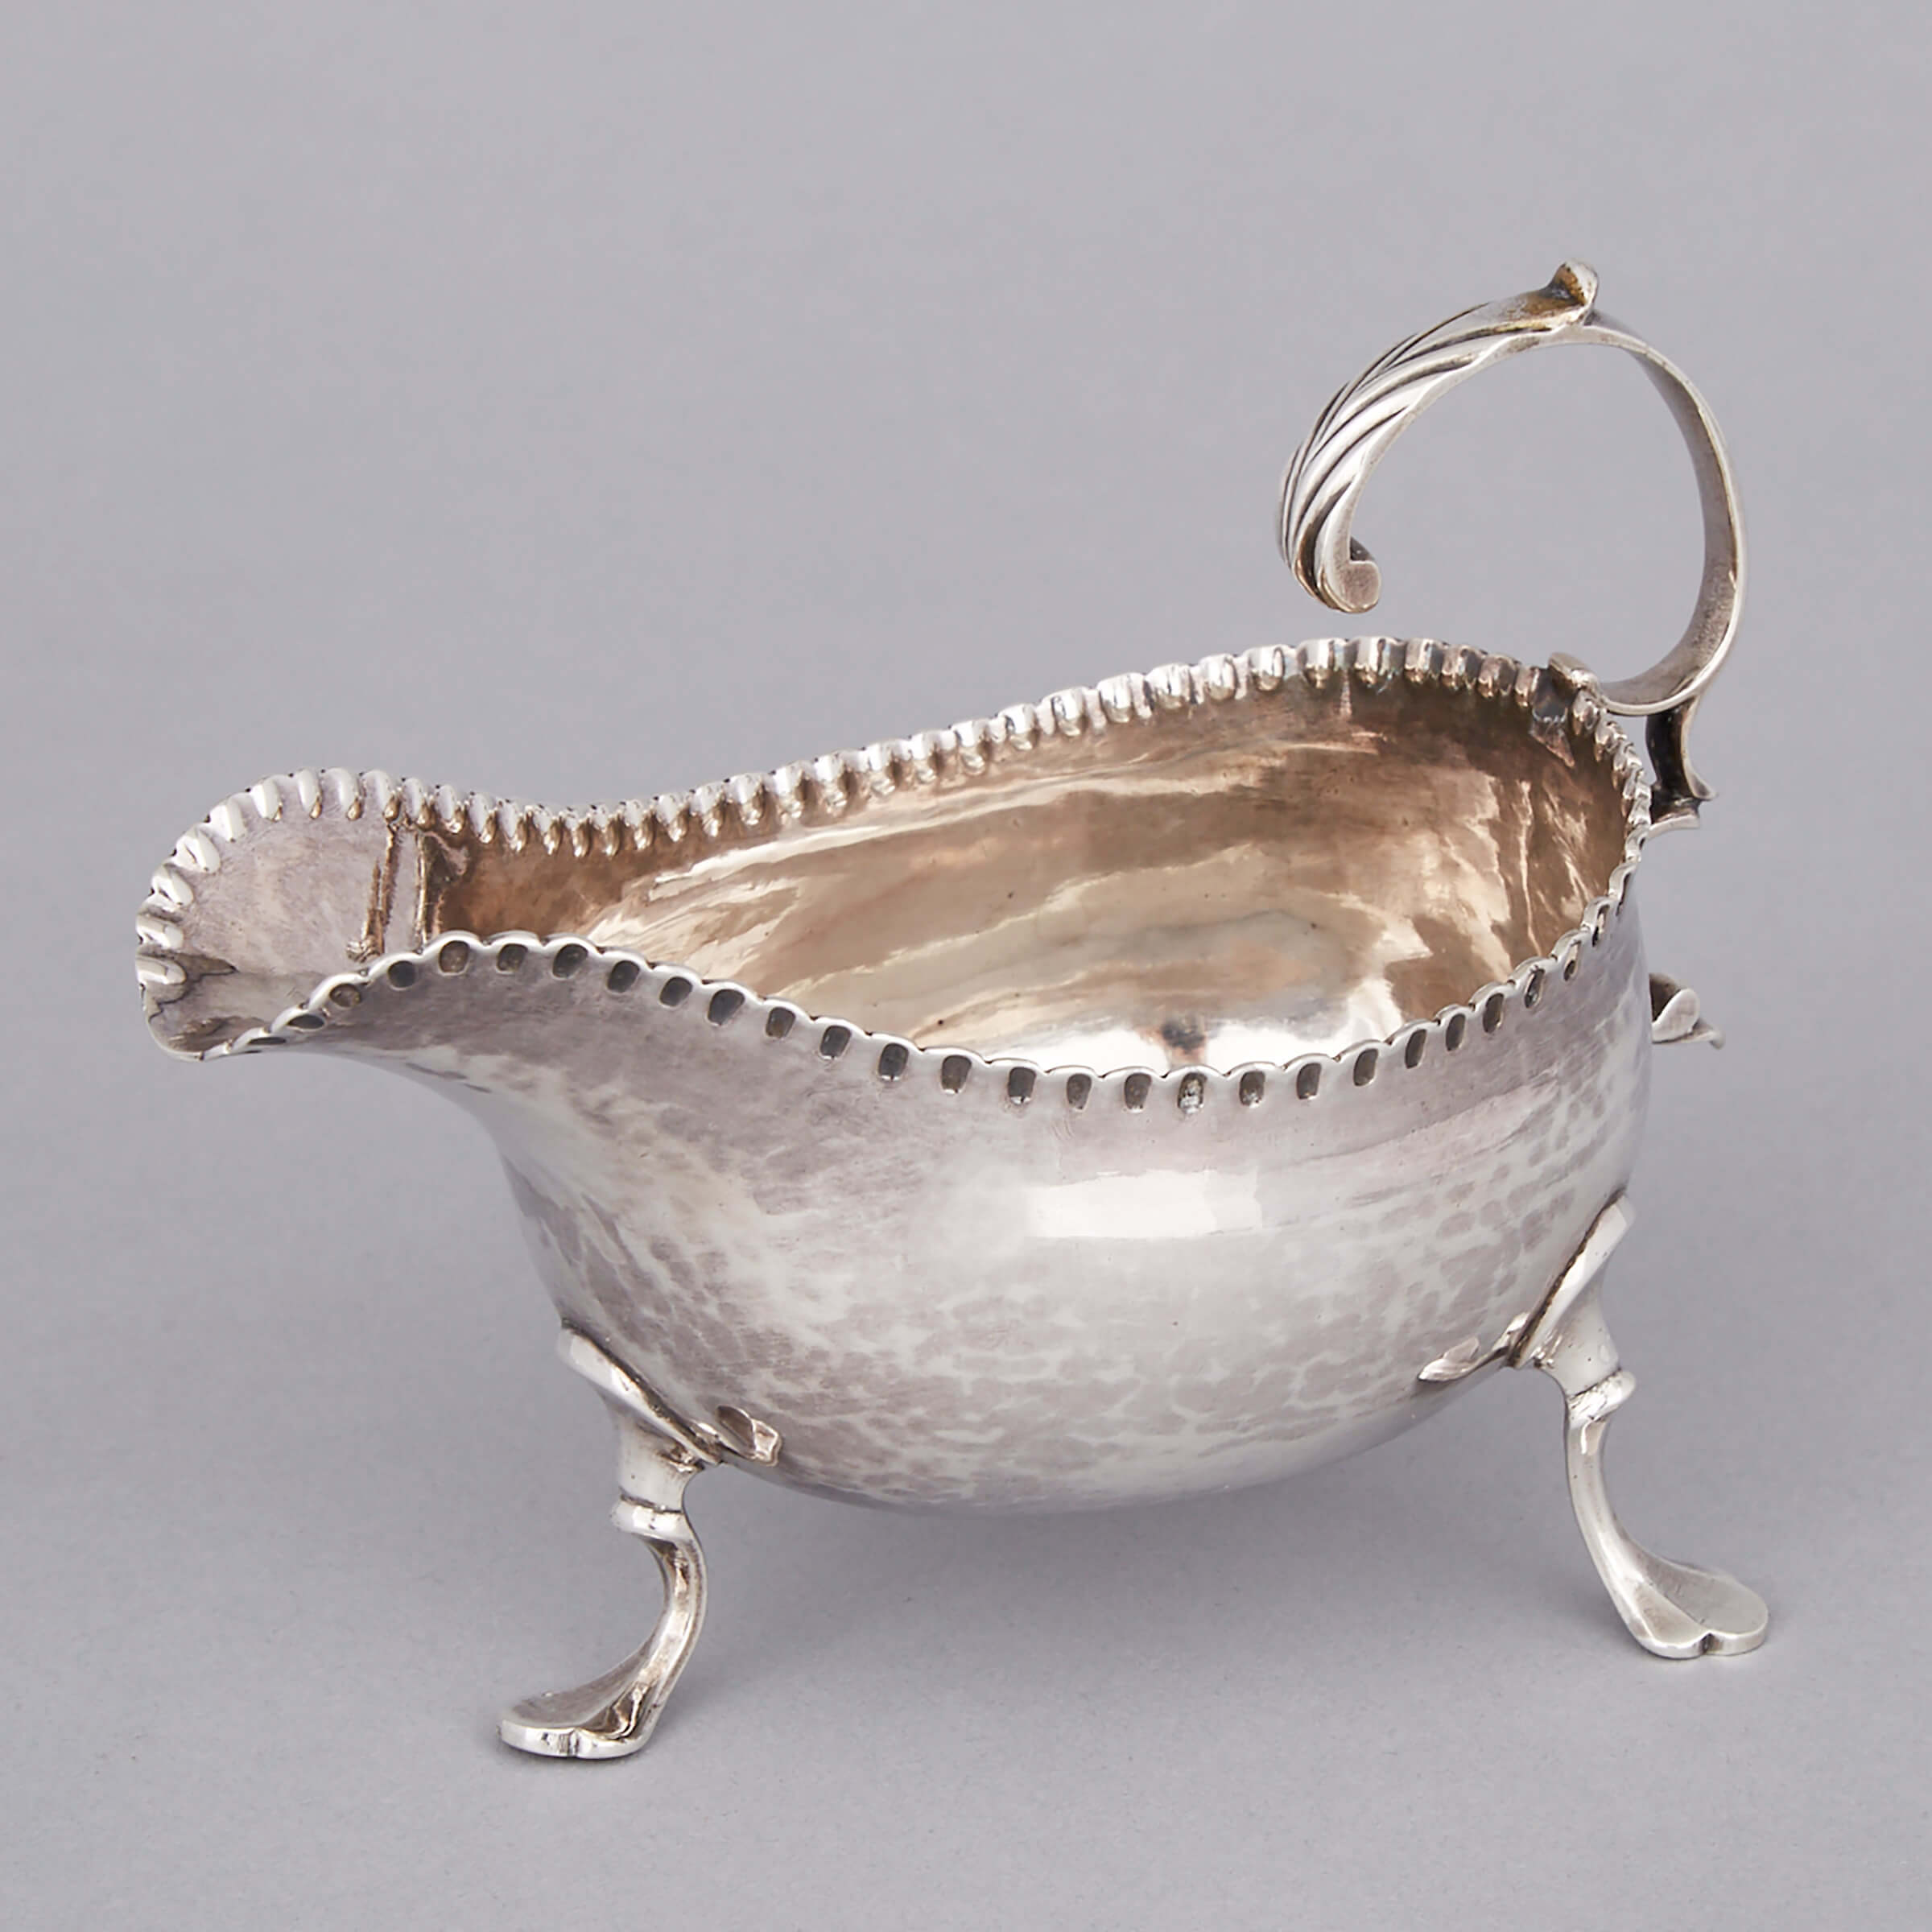 George III Silver Small Sauce Boat, James Stamp, London, 1777